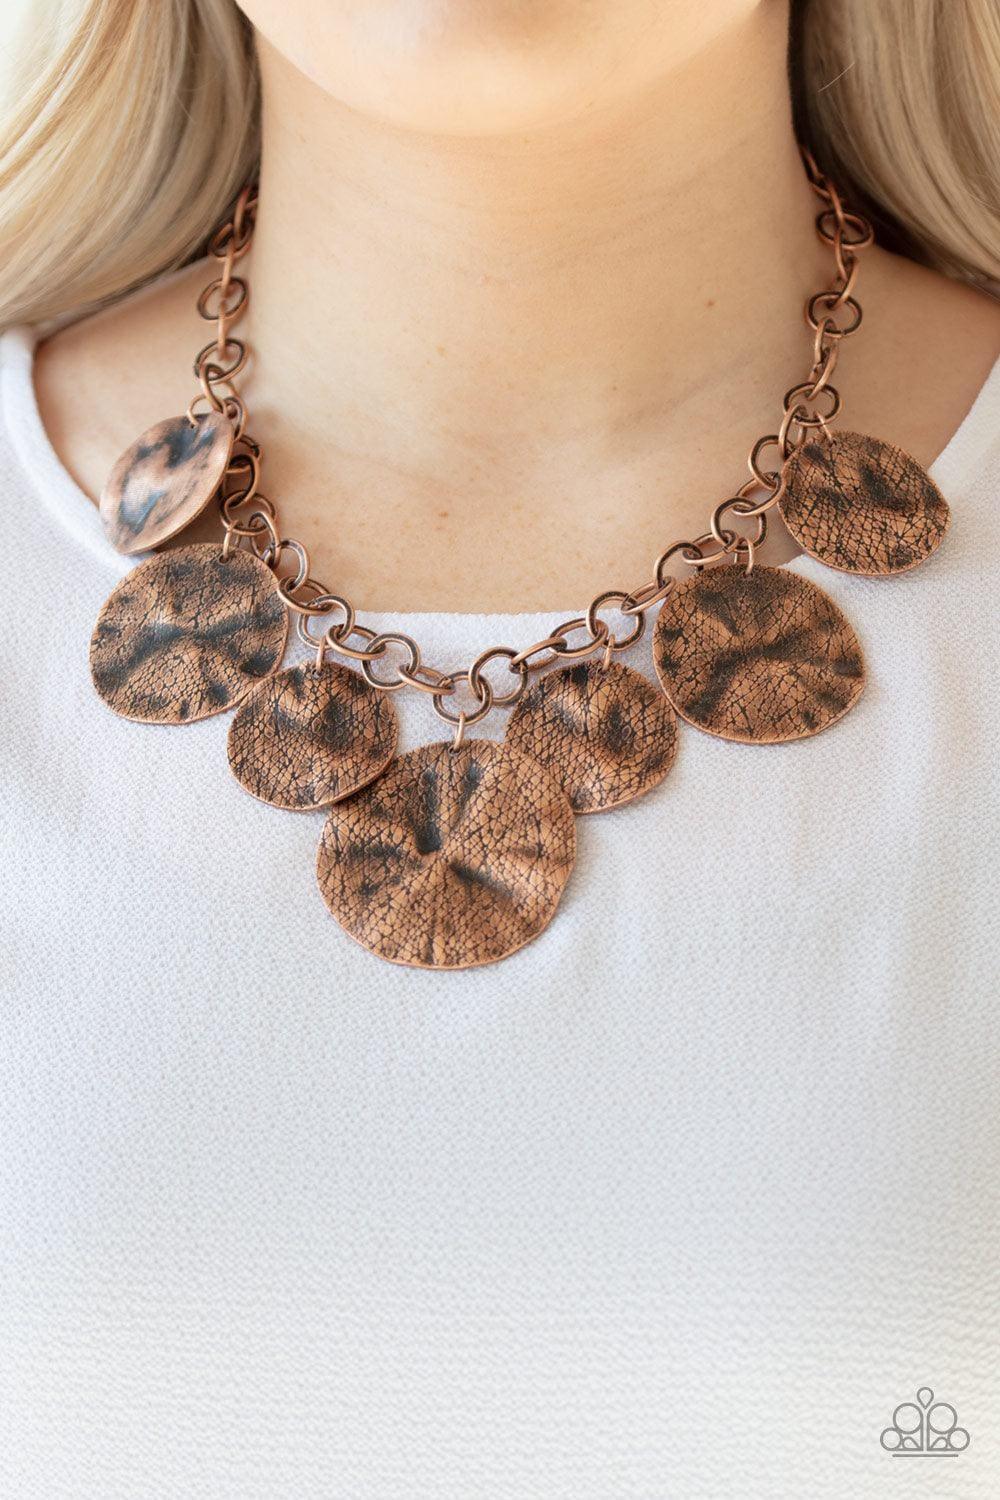 Paparazzi Accessories - Barely Scratched The Surface - Copper Necklace - Bling by JessieK